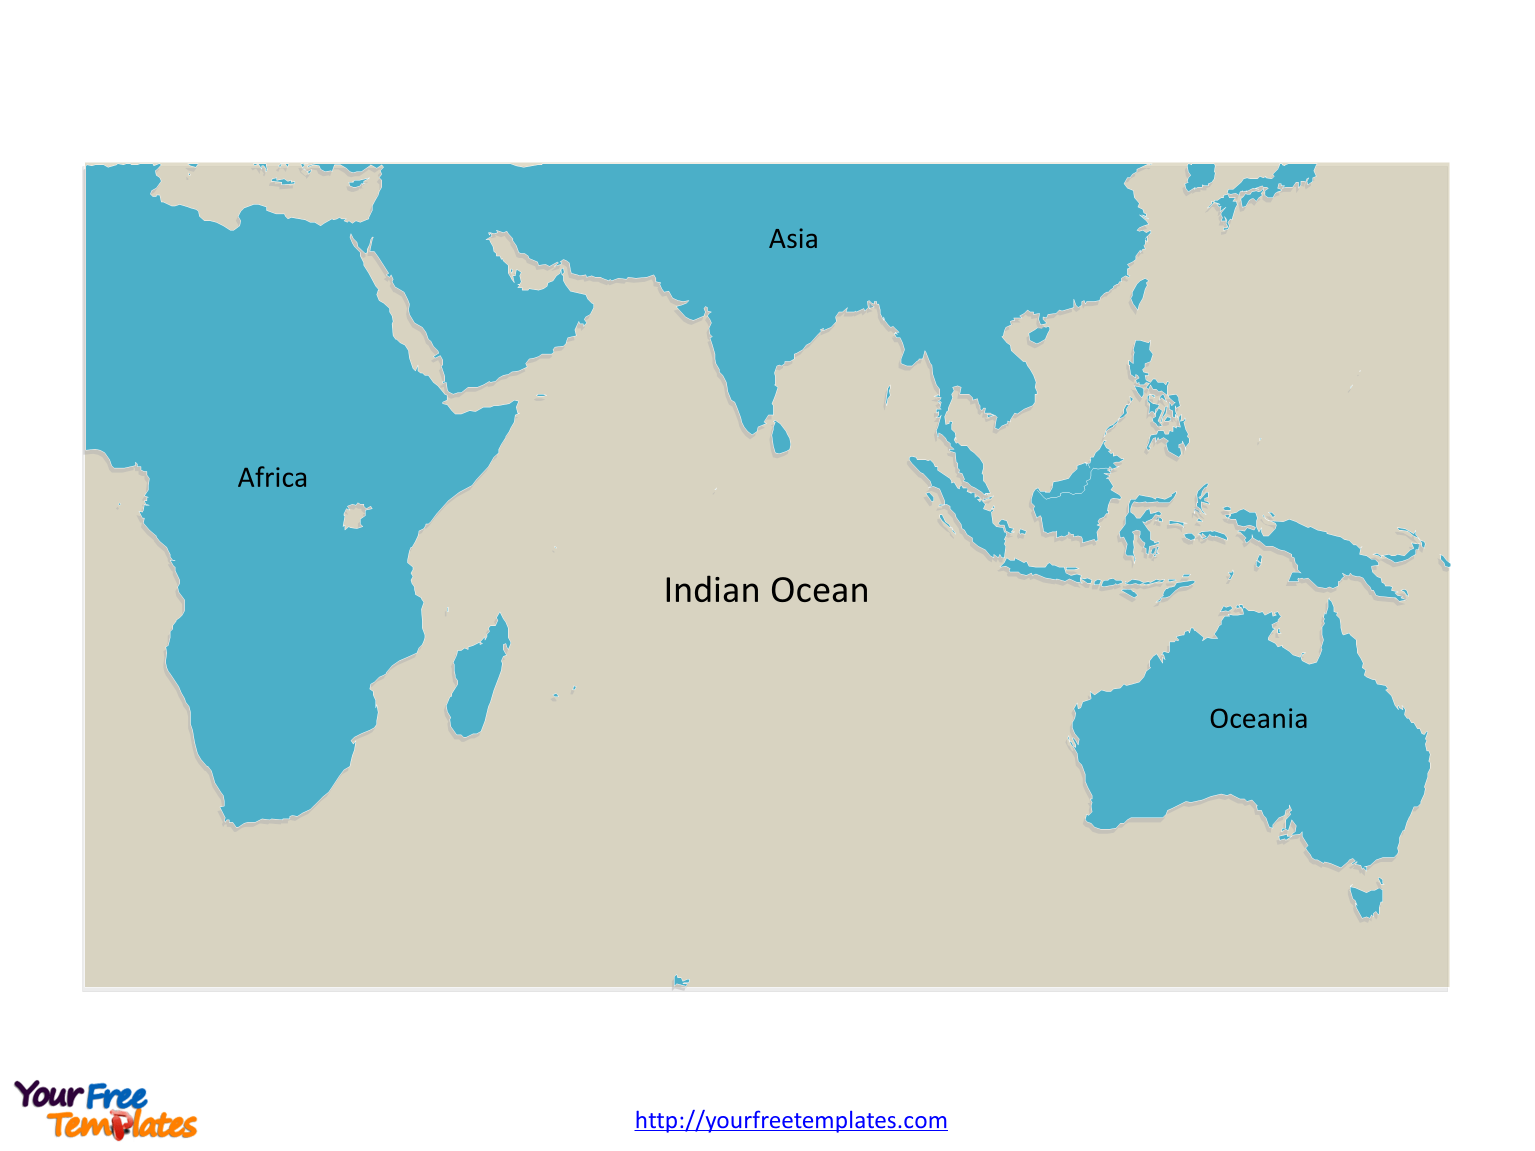 Indian Ocean map labeled with continent names